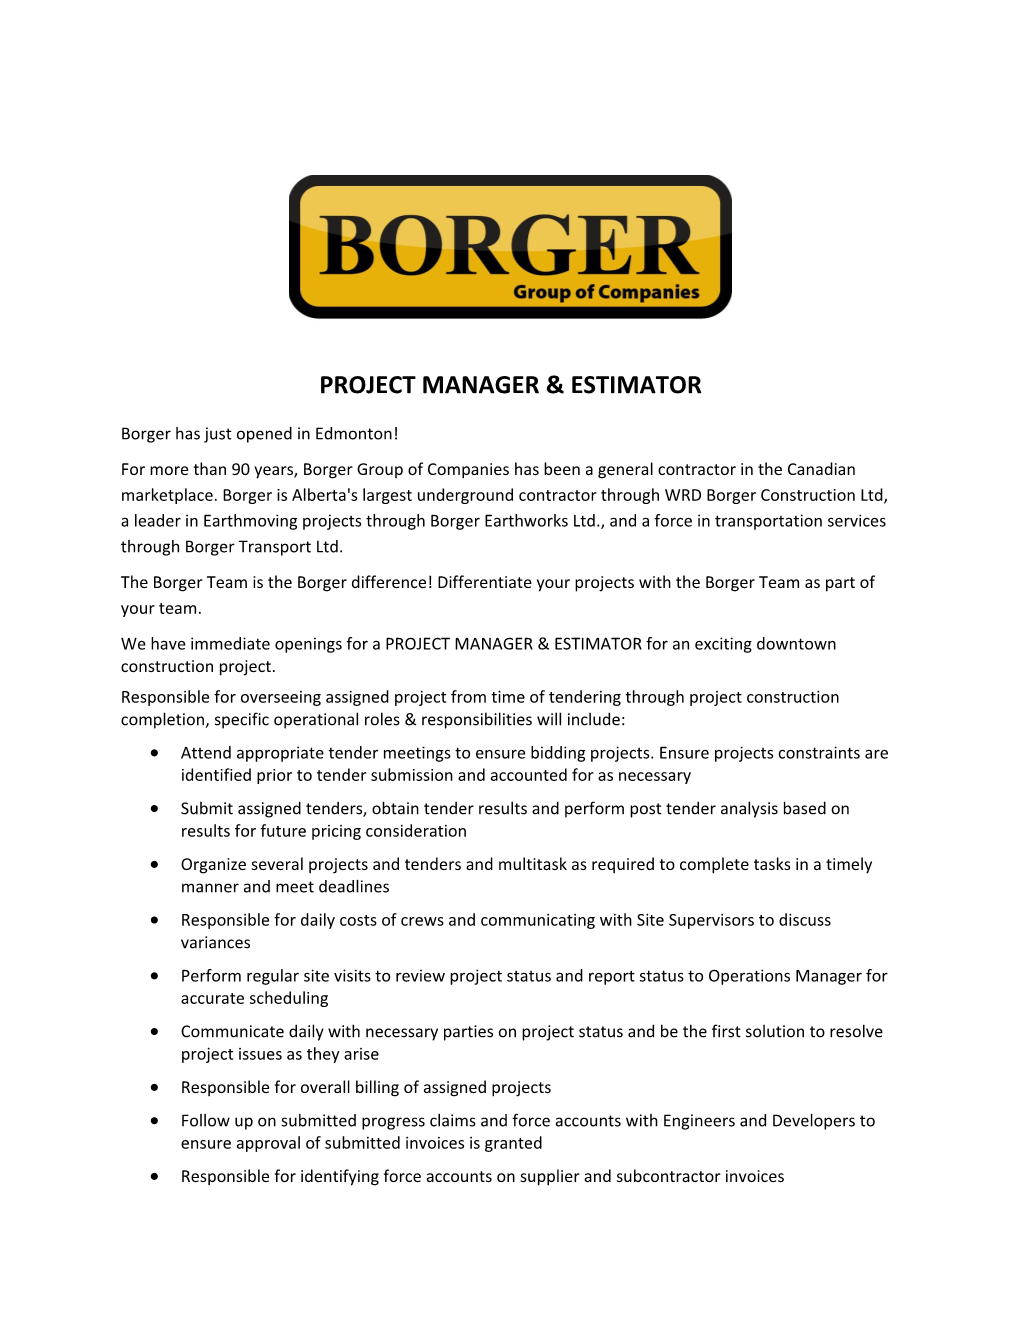 Project Manager & Estimator